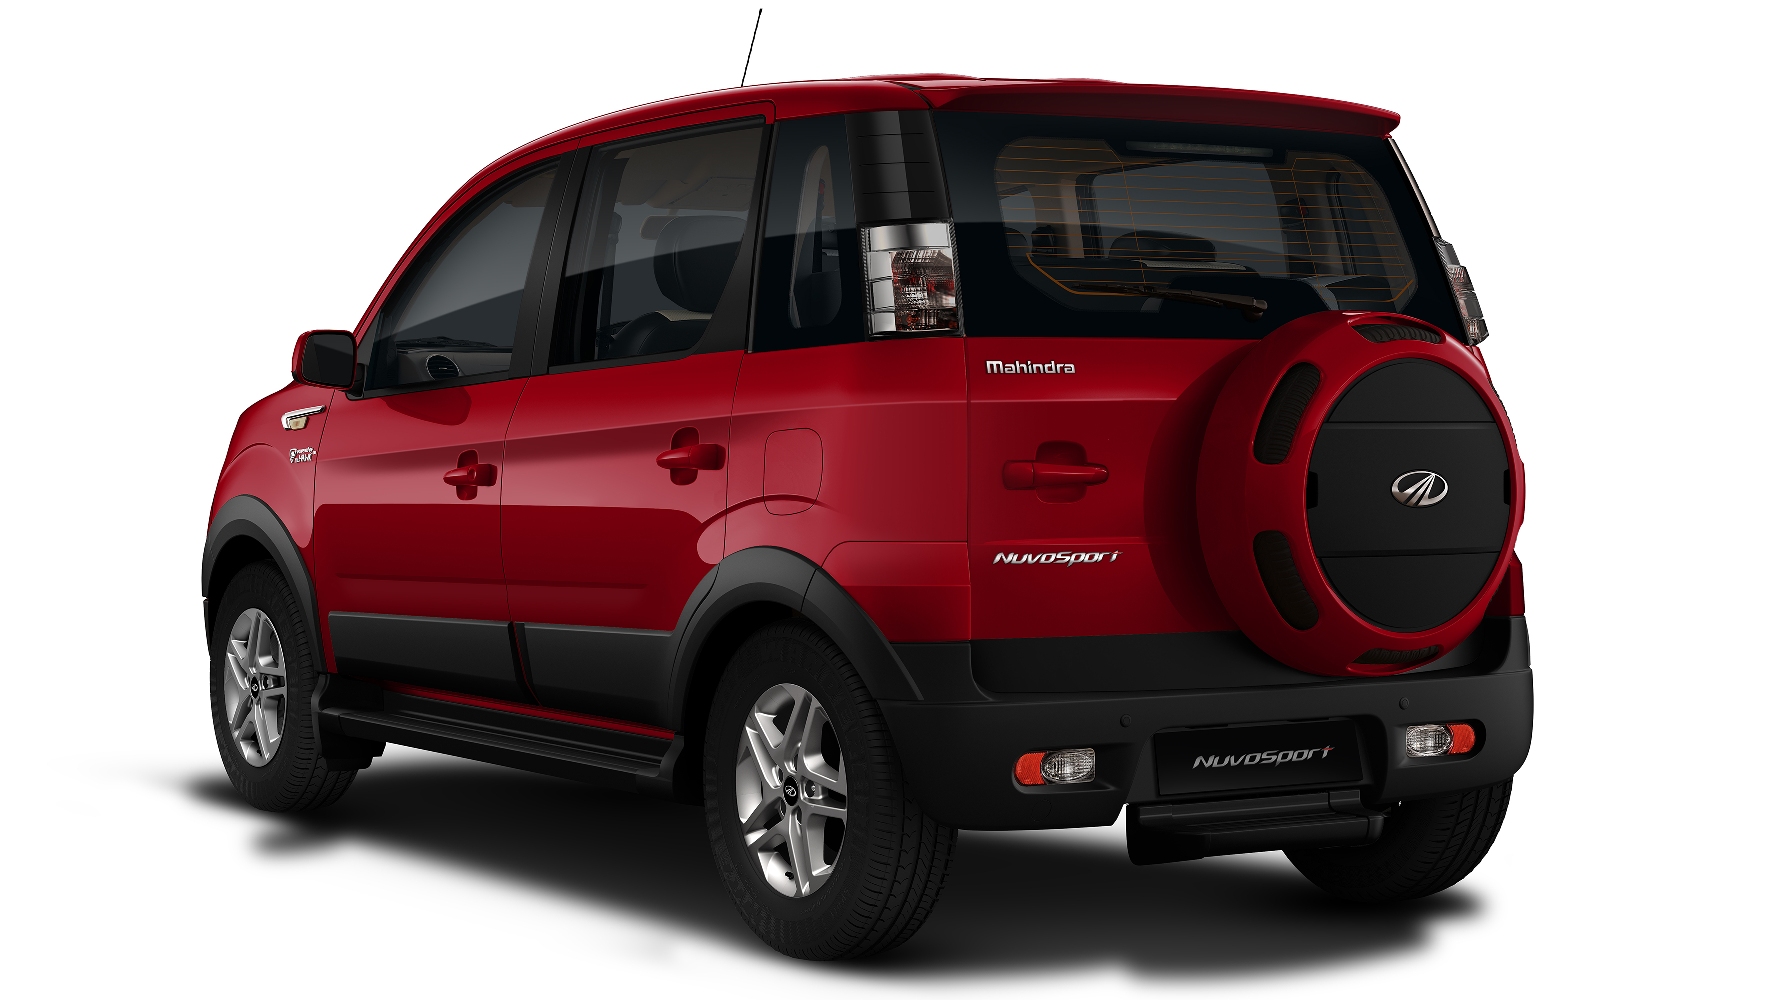 Mahindra Nuvosport will be launched as facelift model of Quanto 